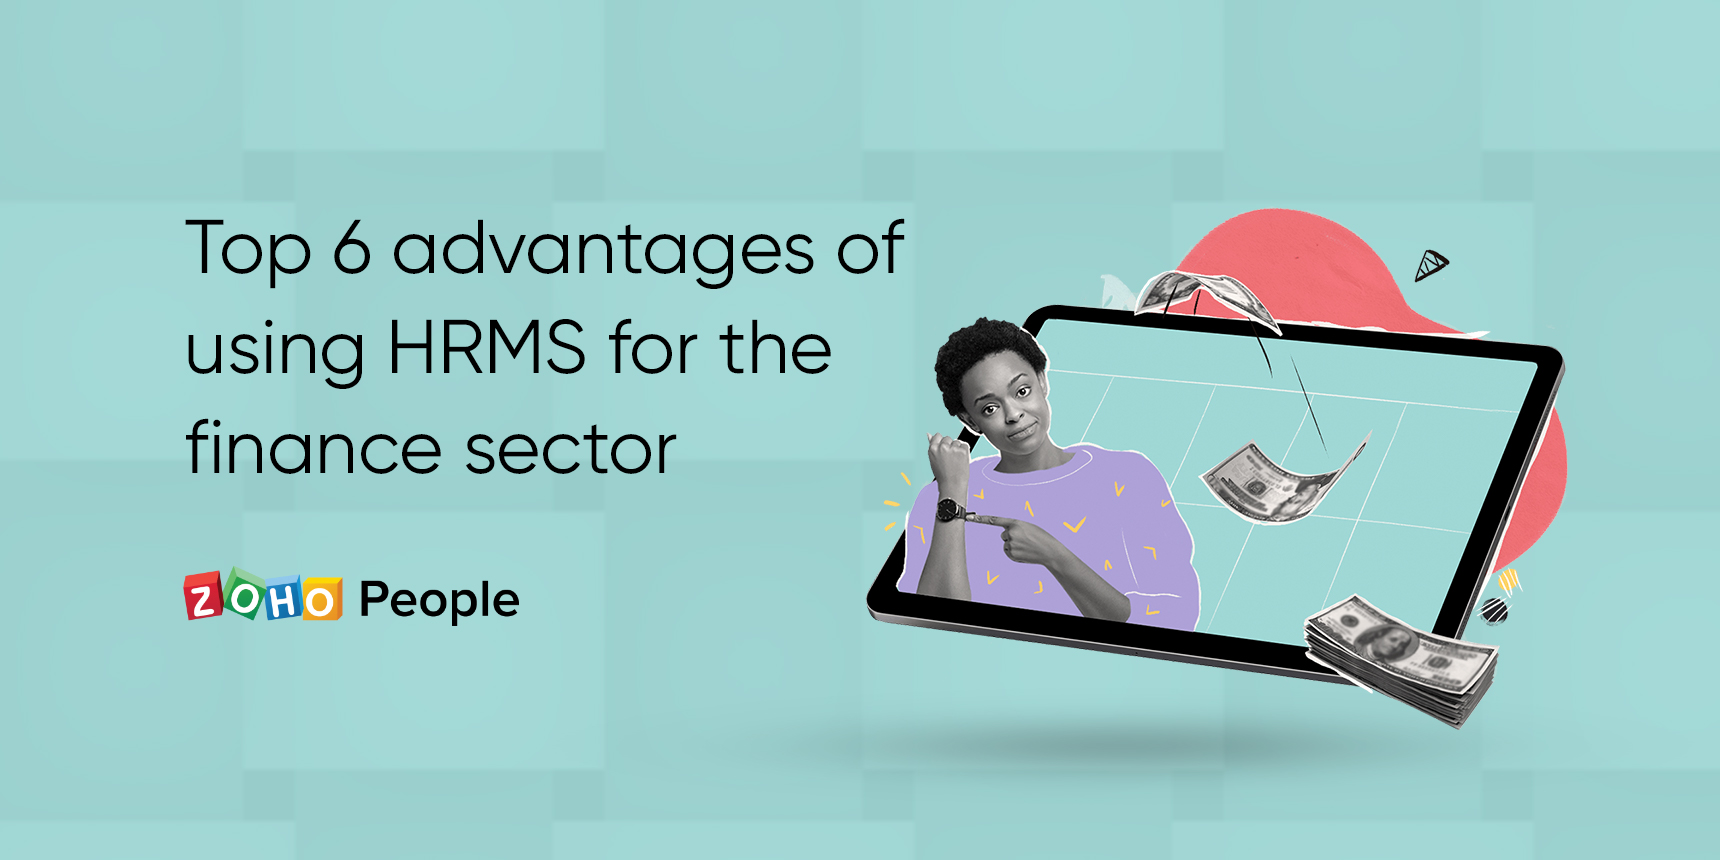 HRMS for the finance sector